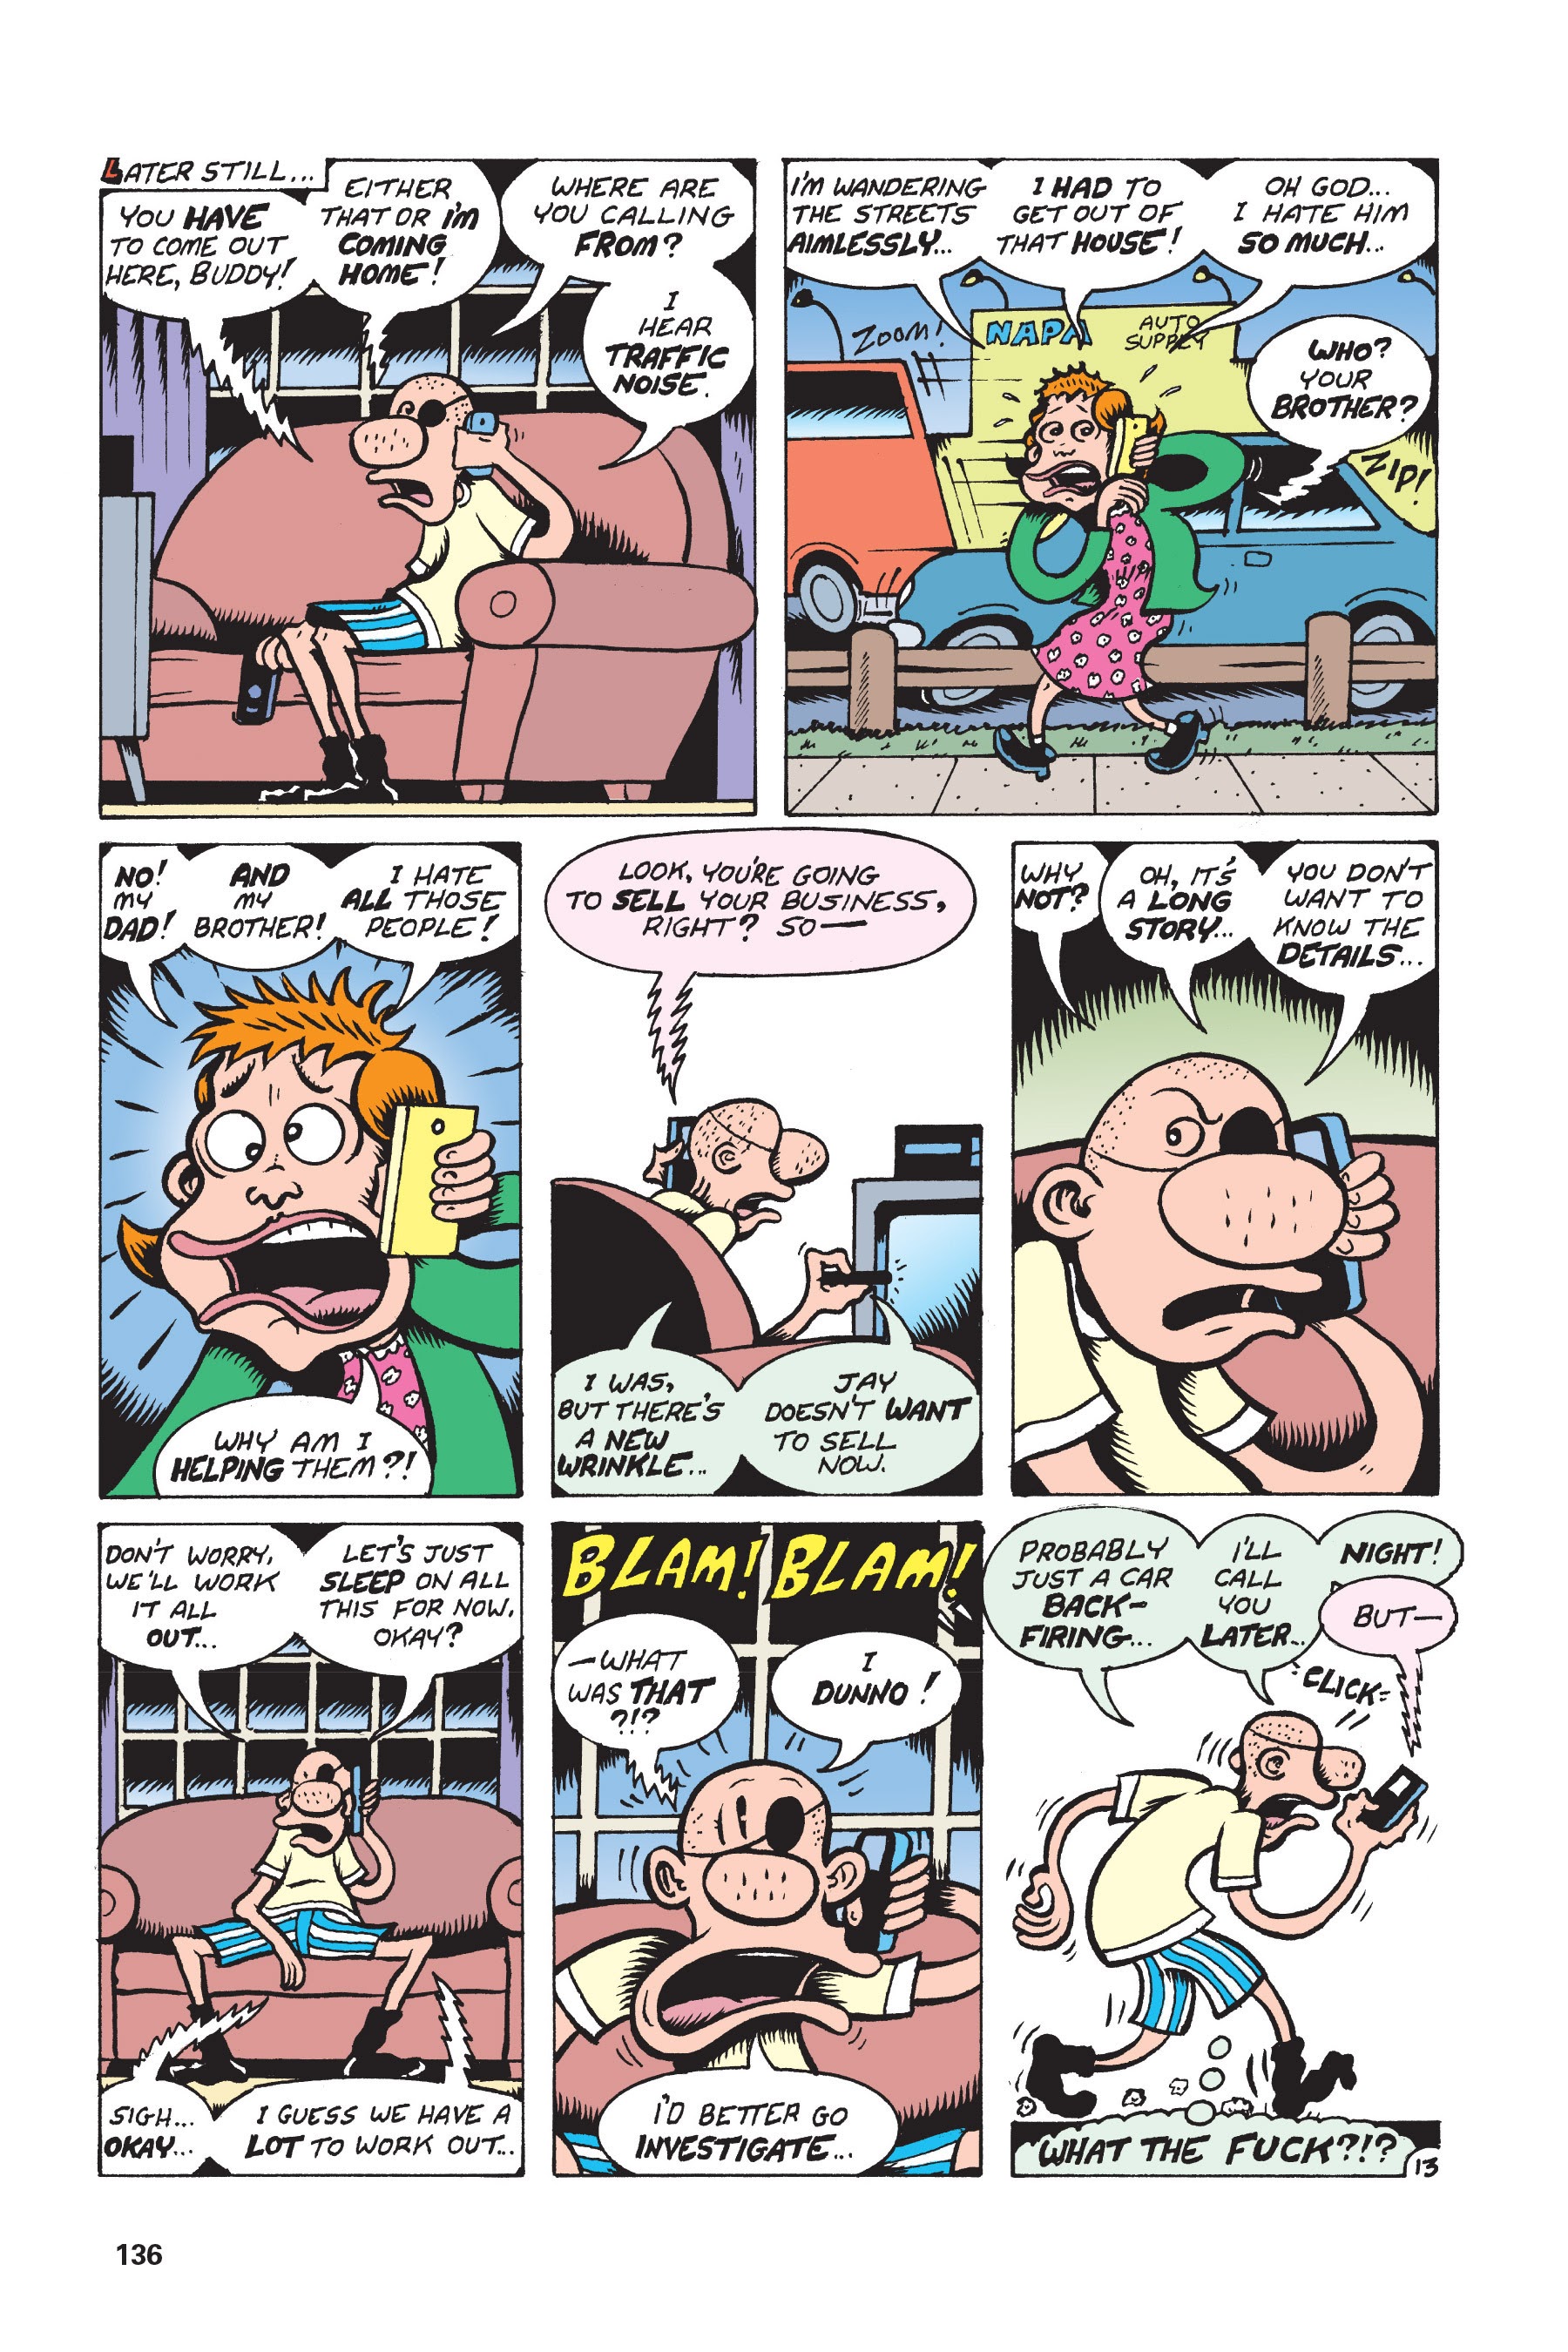 Read online Buddy Buys a Dump comic -  Issue # TPB - 136